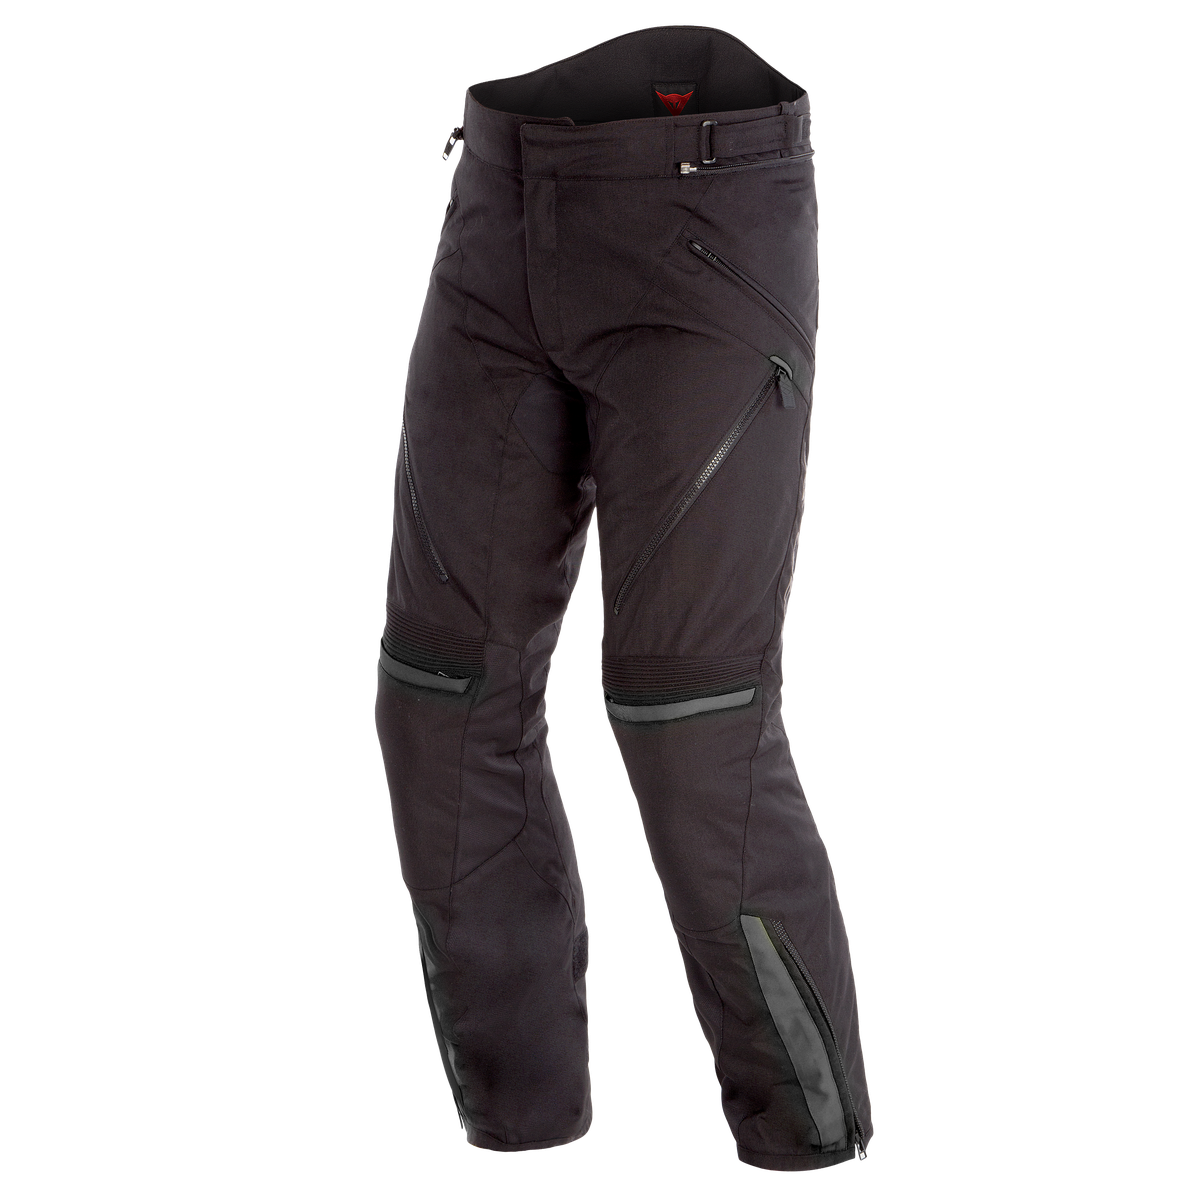 Dainese Women's New Drake Air Pants Review at RevZilla.com - YouTube